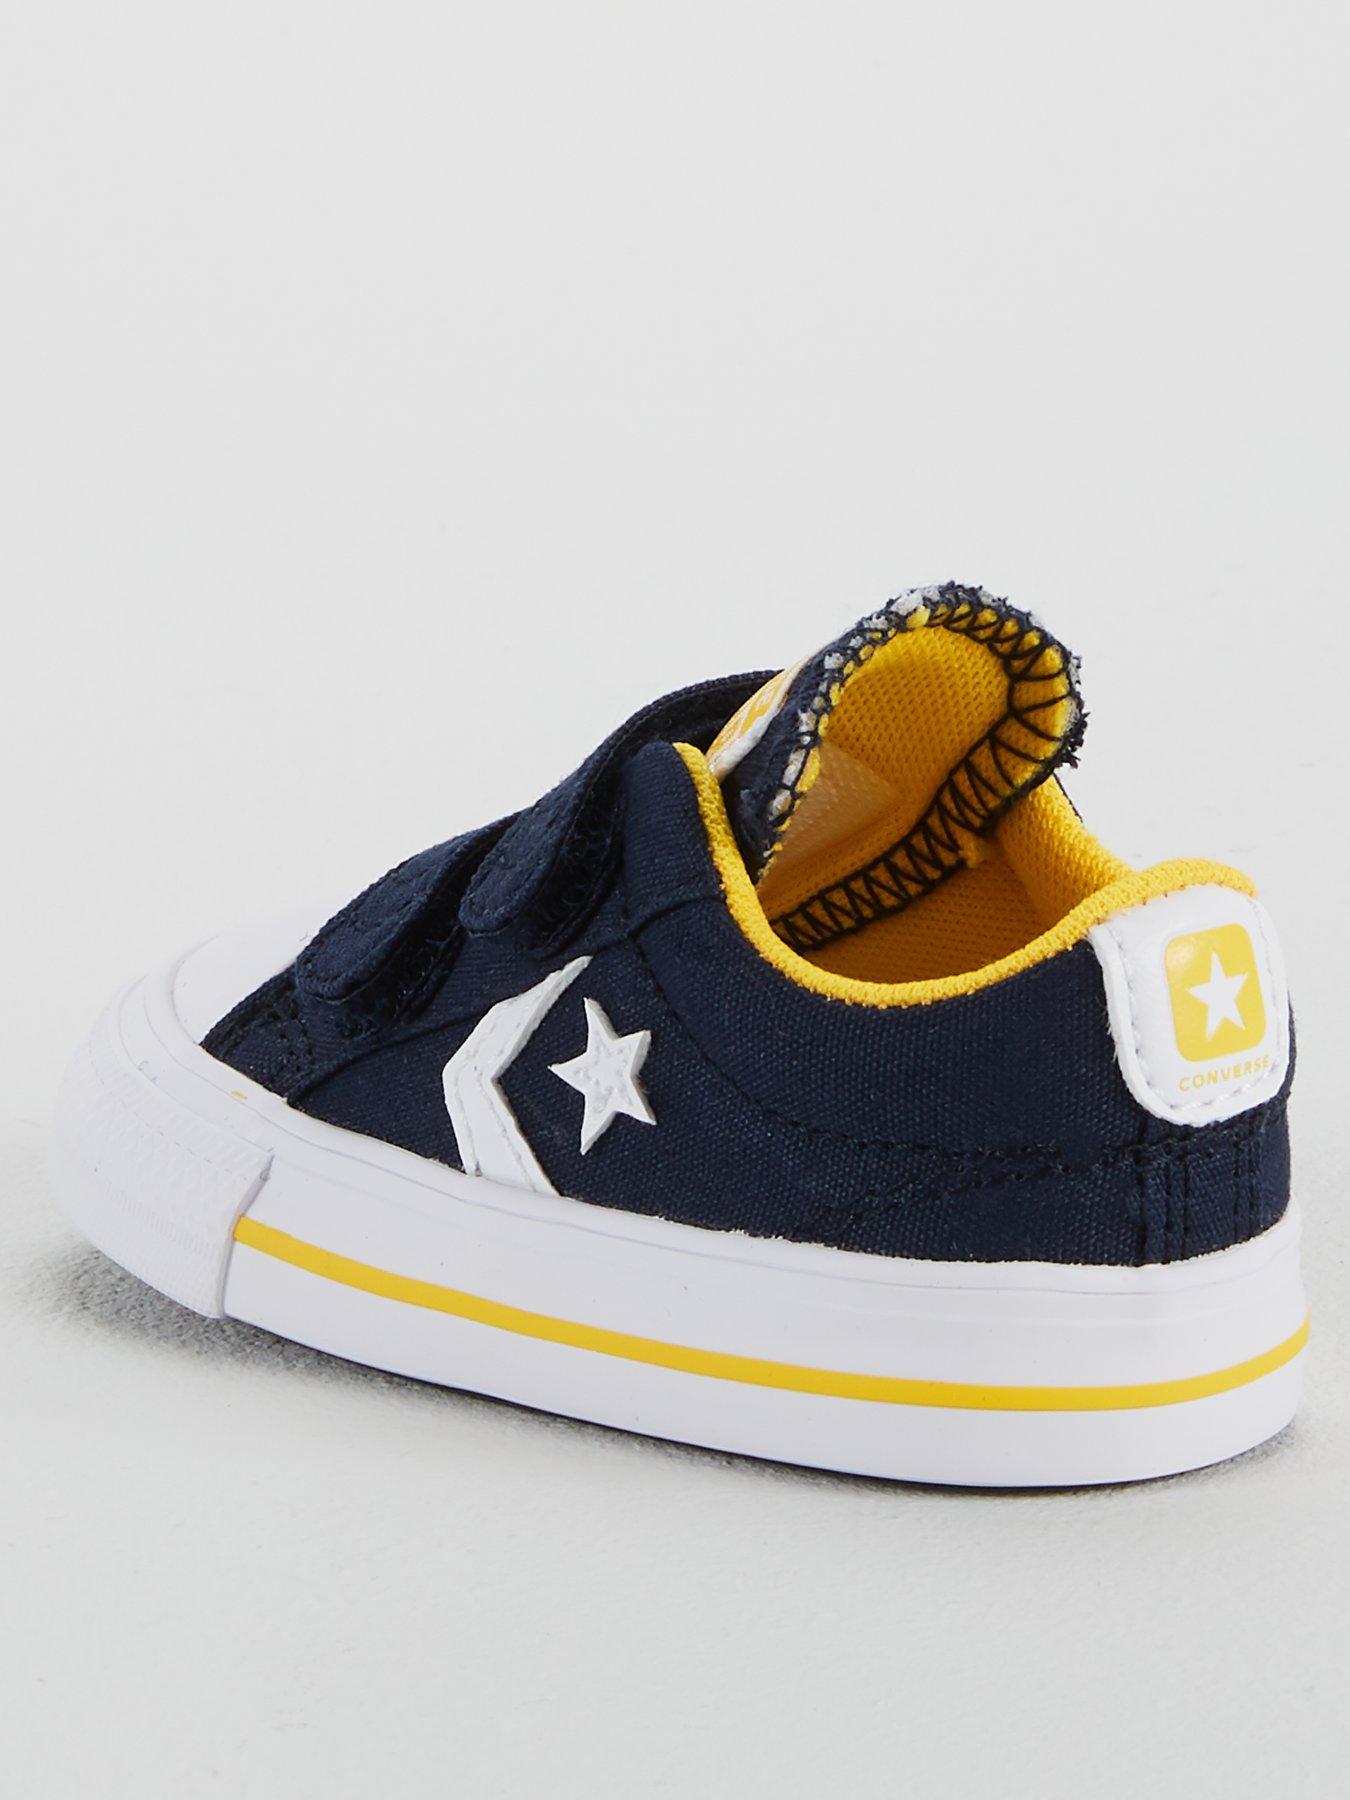 converse star player ox infant